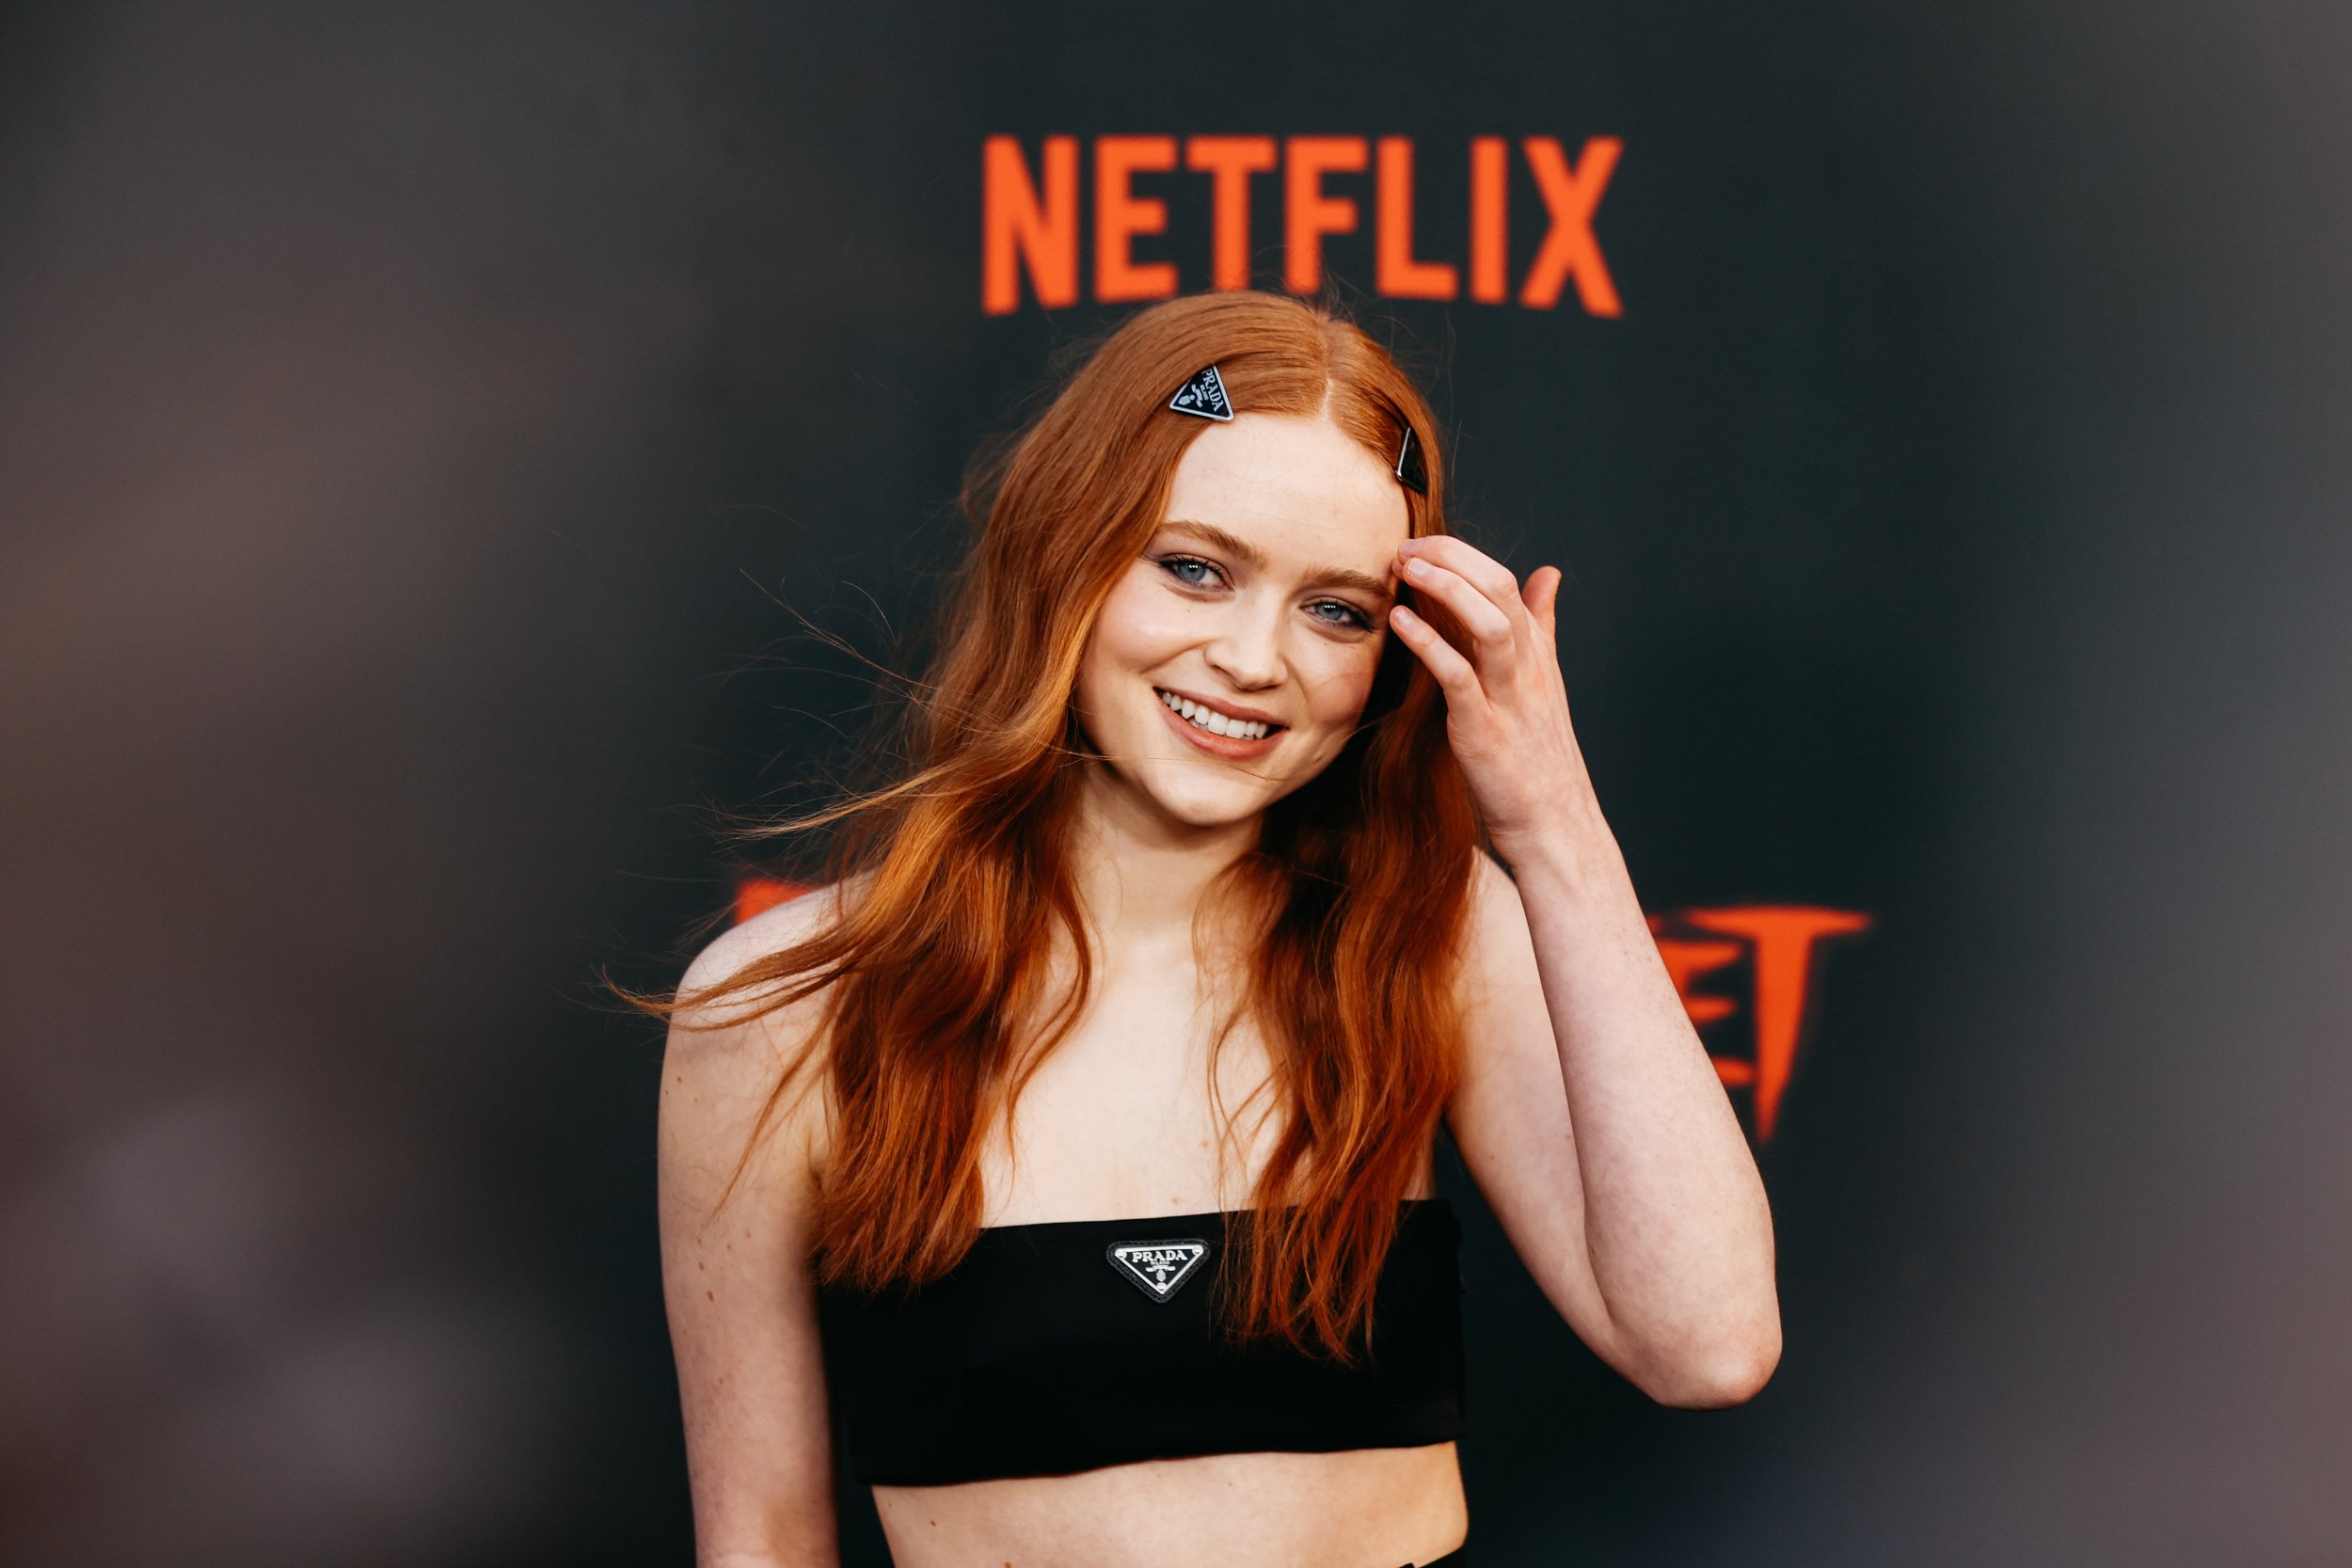 'Fear Street' star Sadie Sink smiling at the camera and touching her hair in front of a Netflix wall